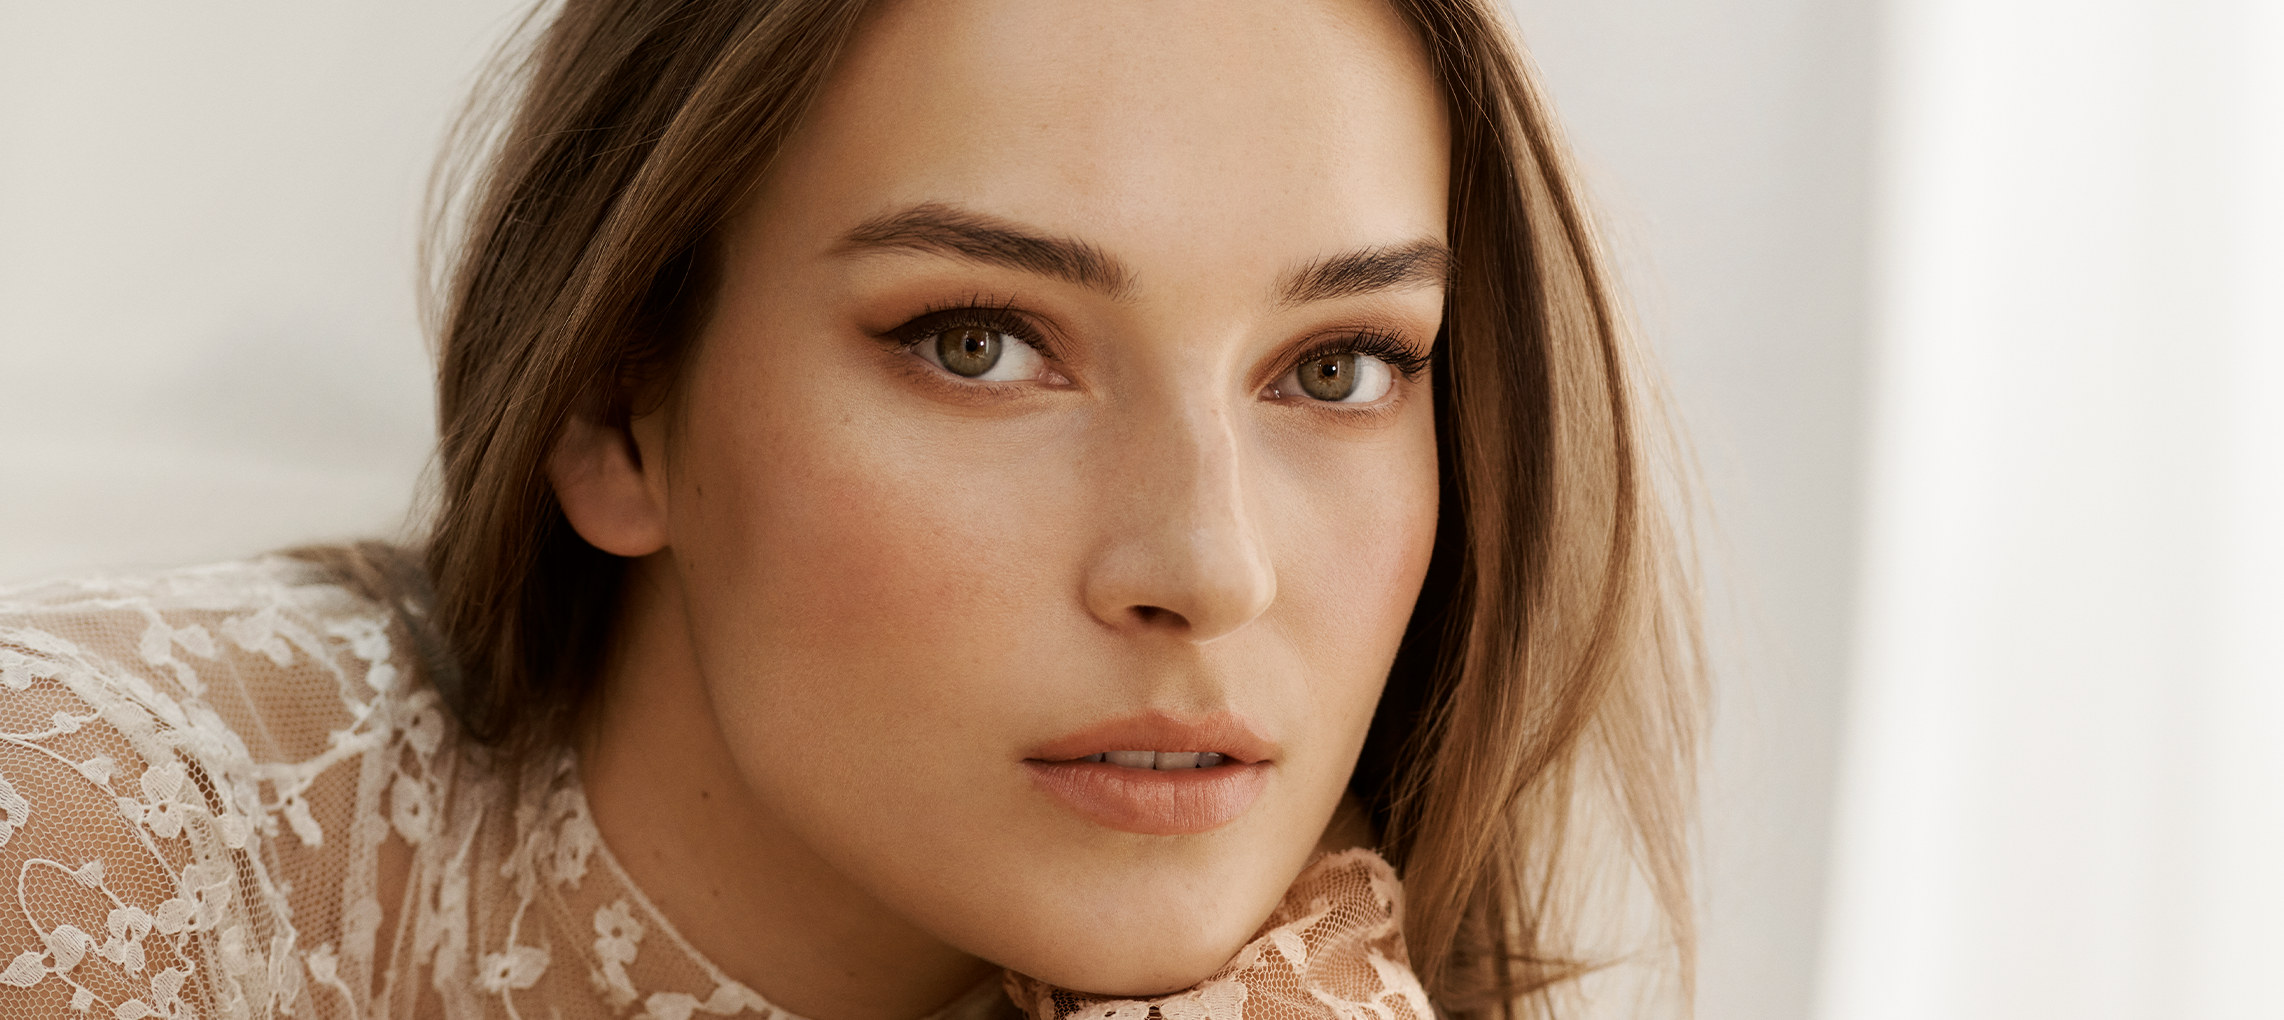 Soft Glam Makeup: How to Get the Look, According to the Pros